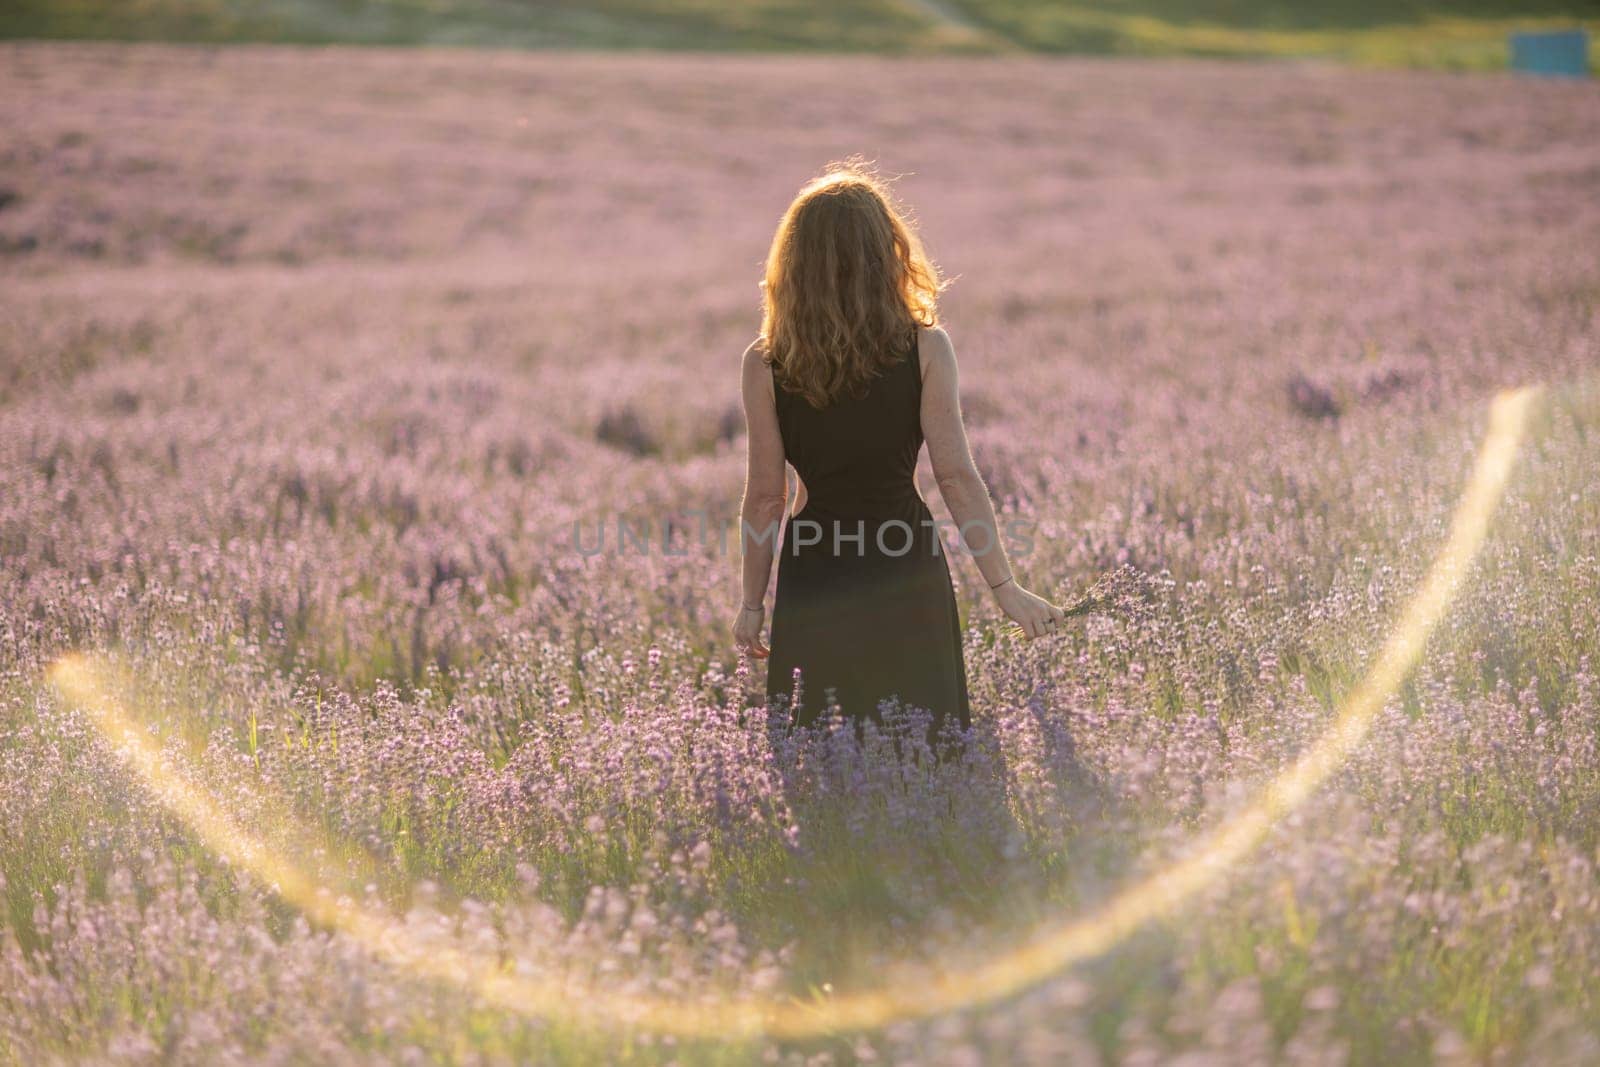 Back view woman lavender sunset. Happy woman in black dress. Aromatherapy concept, lavender oil, photo session in lavender.